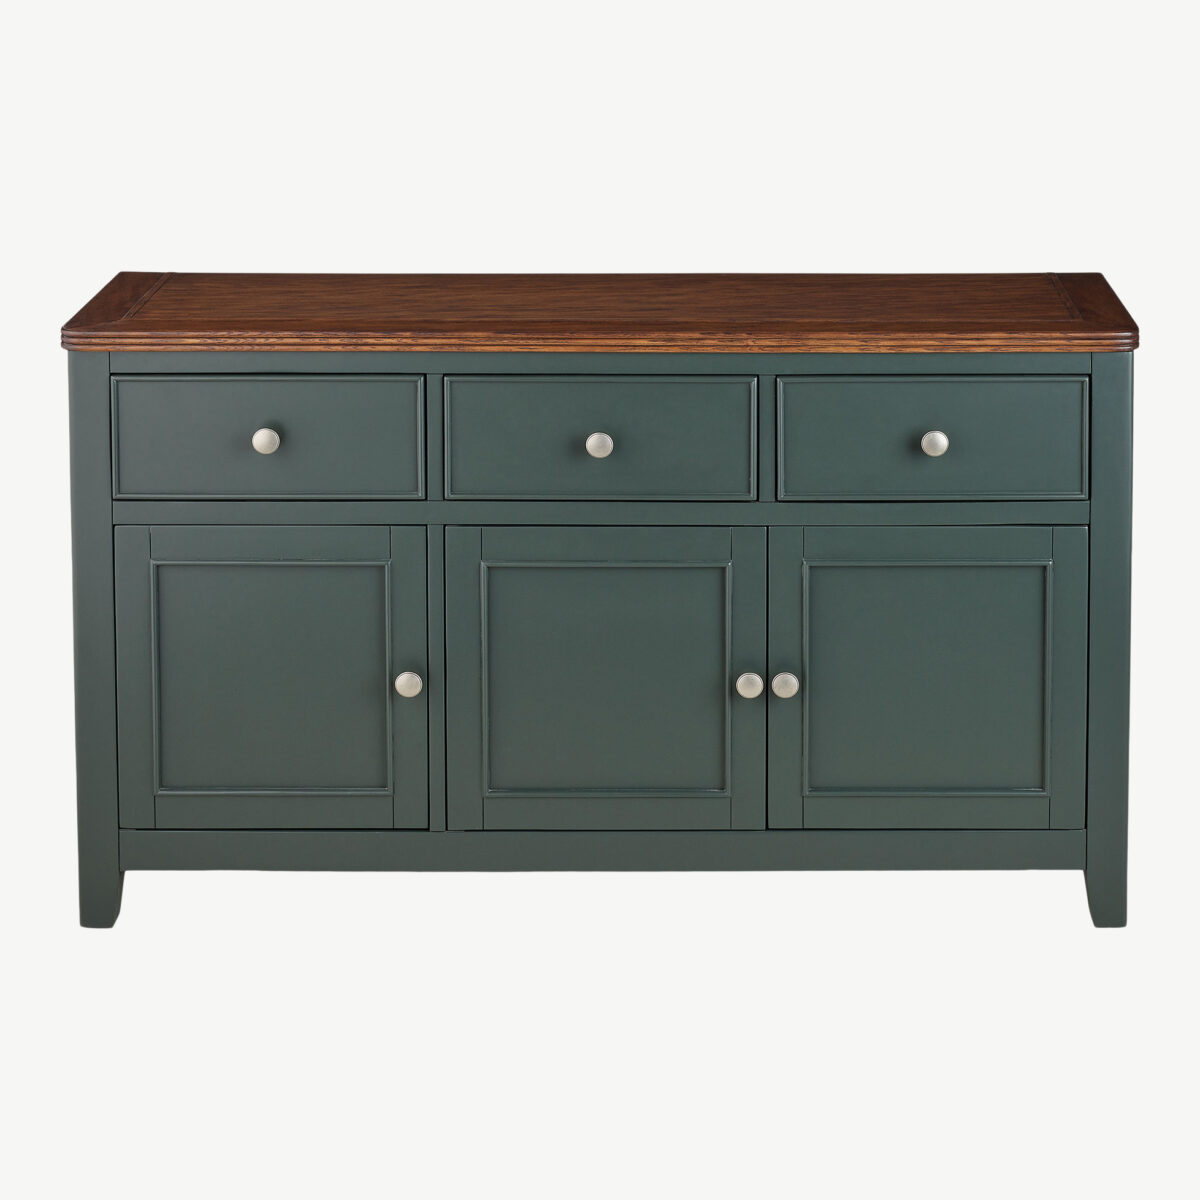 Green scenic Sideboard Buffet Cabinet with 3 Storage Drawers, Kitchen Cabinet Coffee Bar Cabinet with Adjustable Shelf for Living Room, Gray